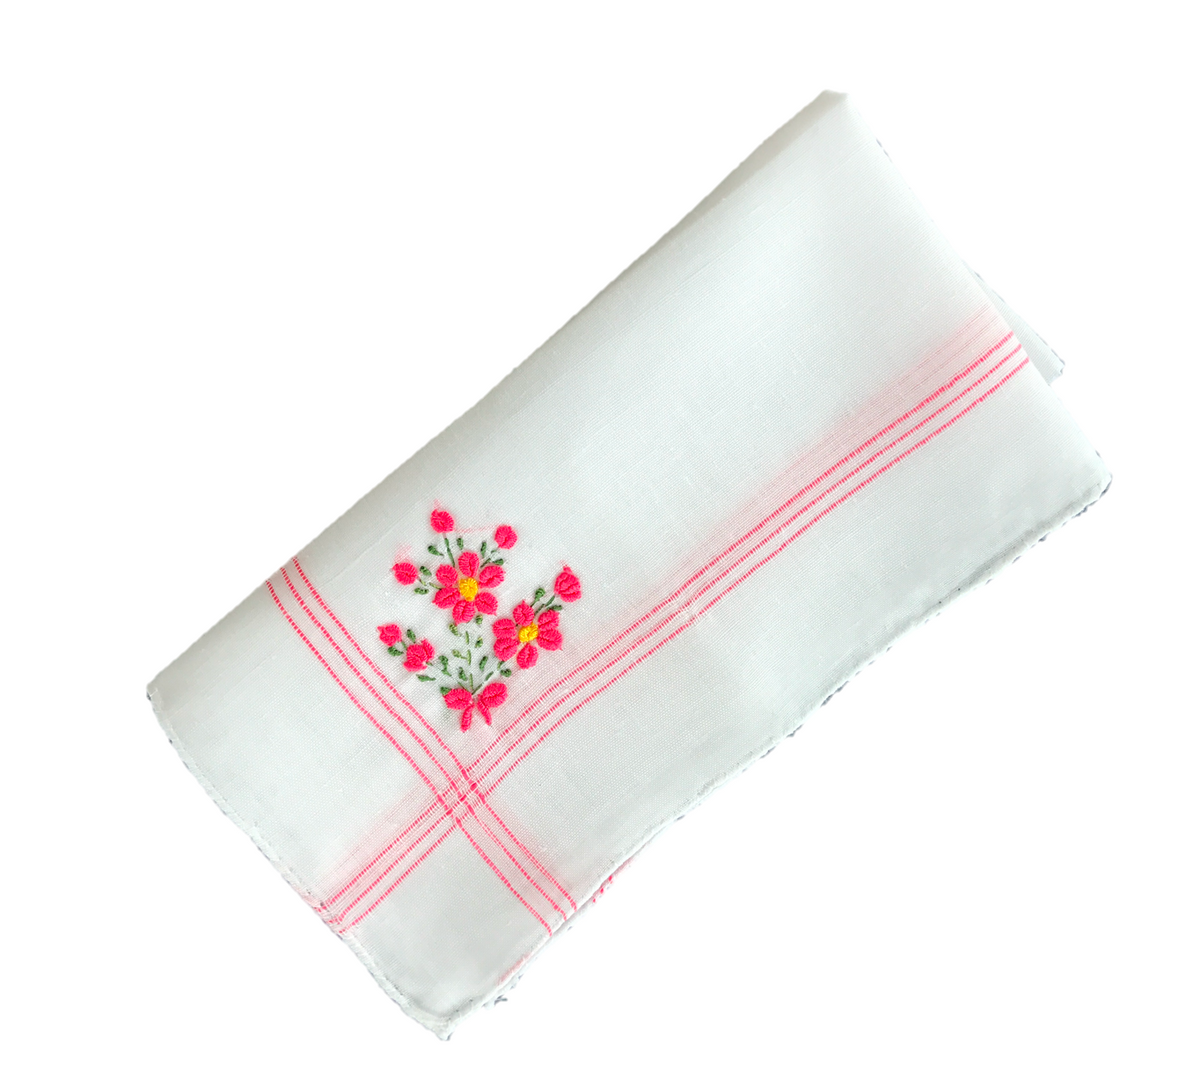 Colorful Handkerchief Collection: Rose with Flowers